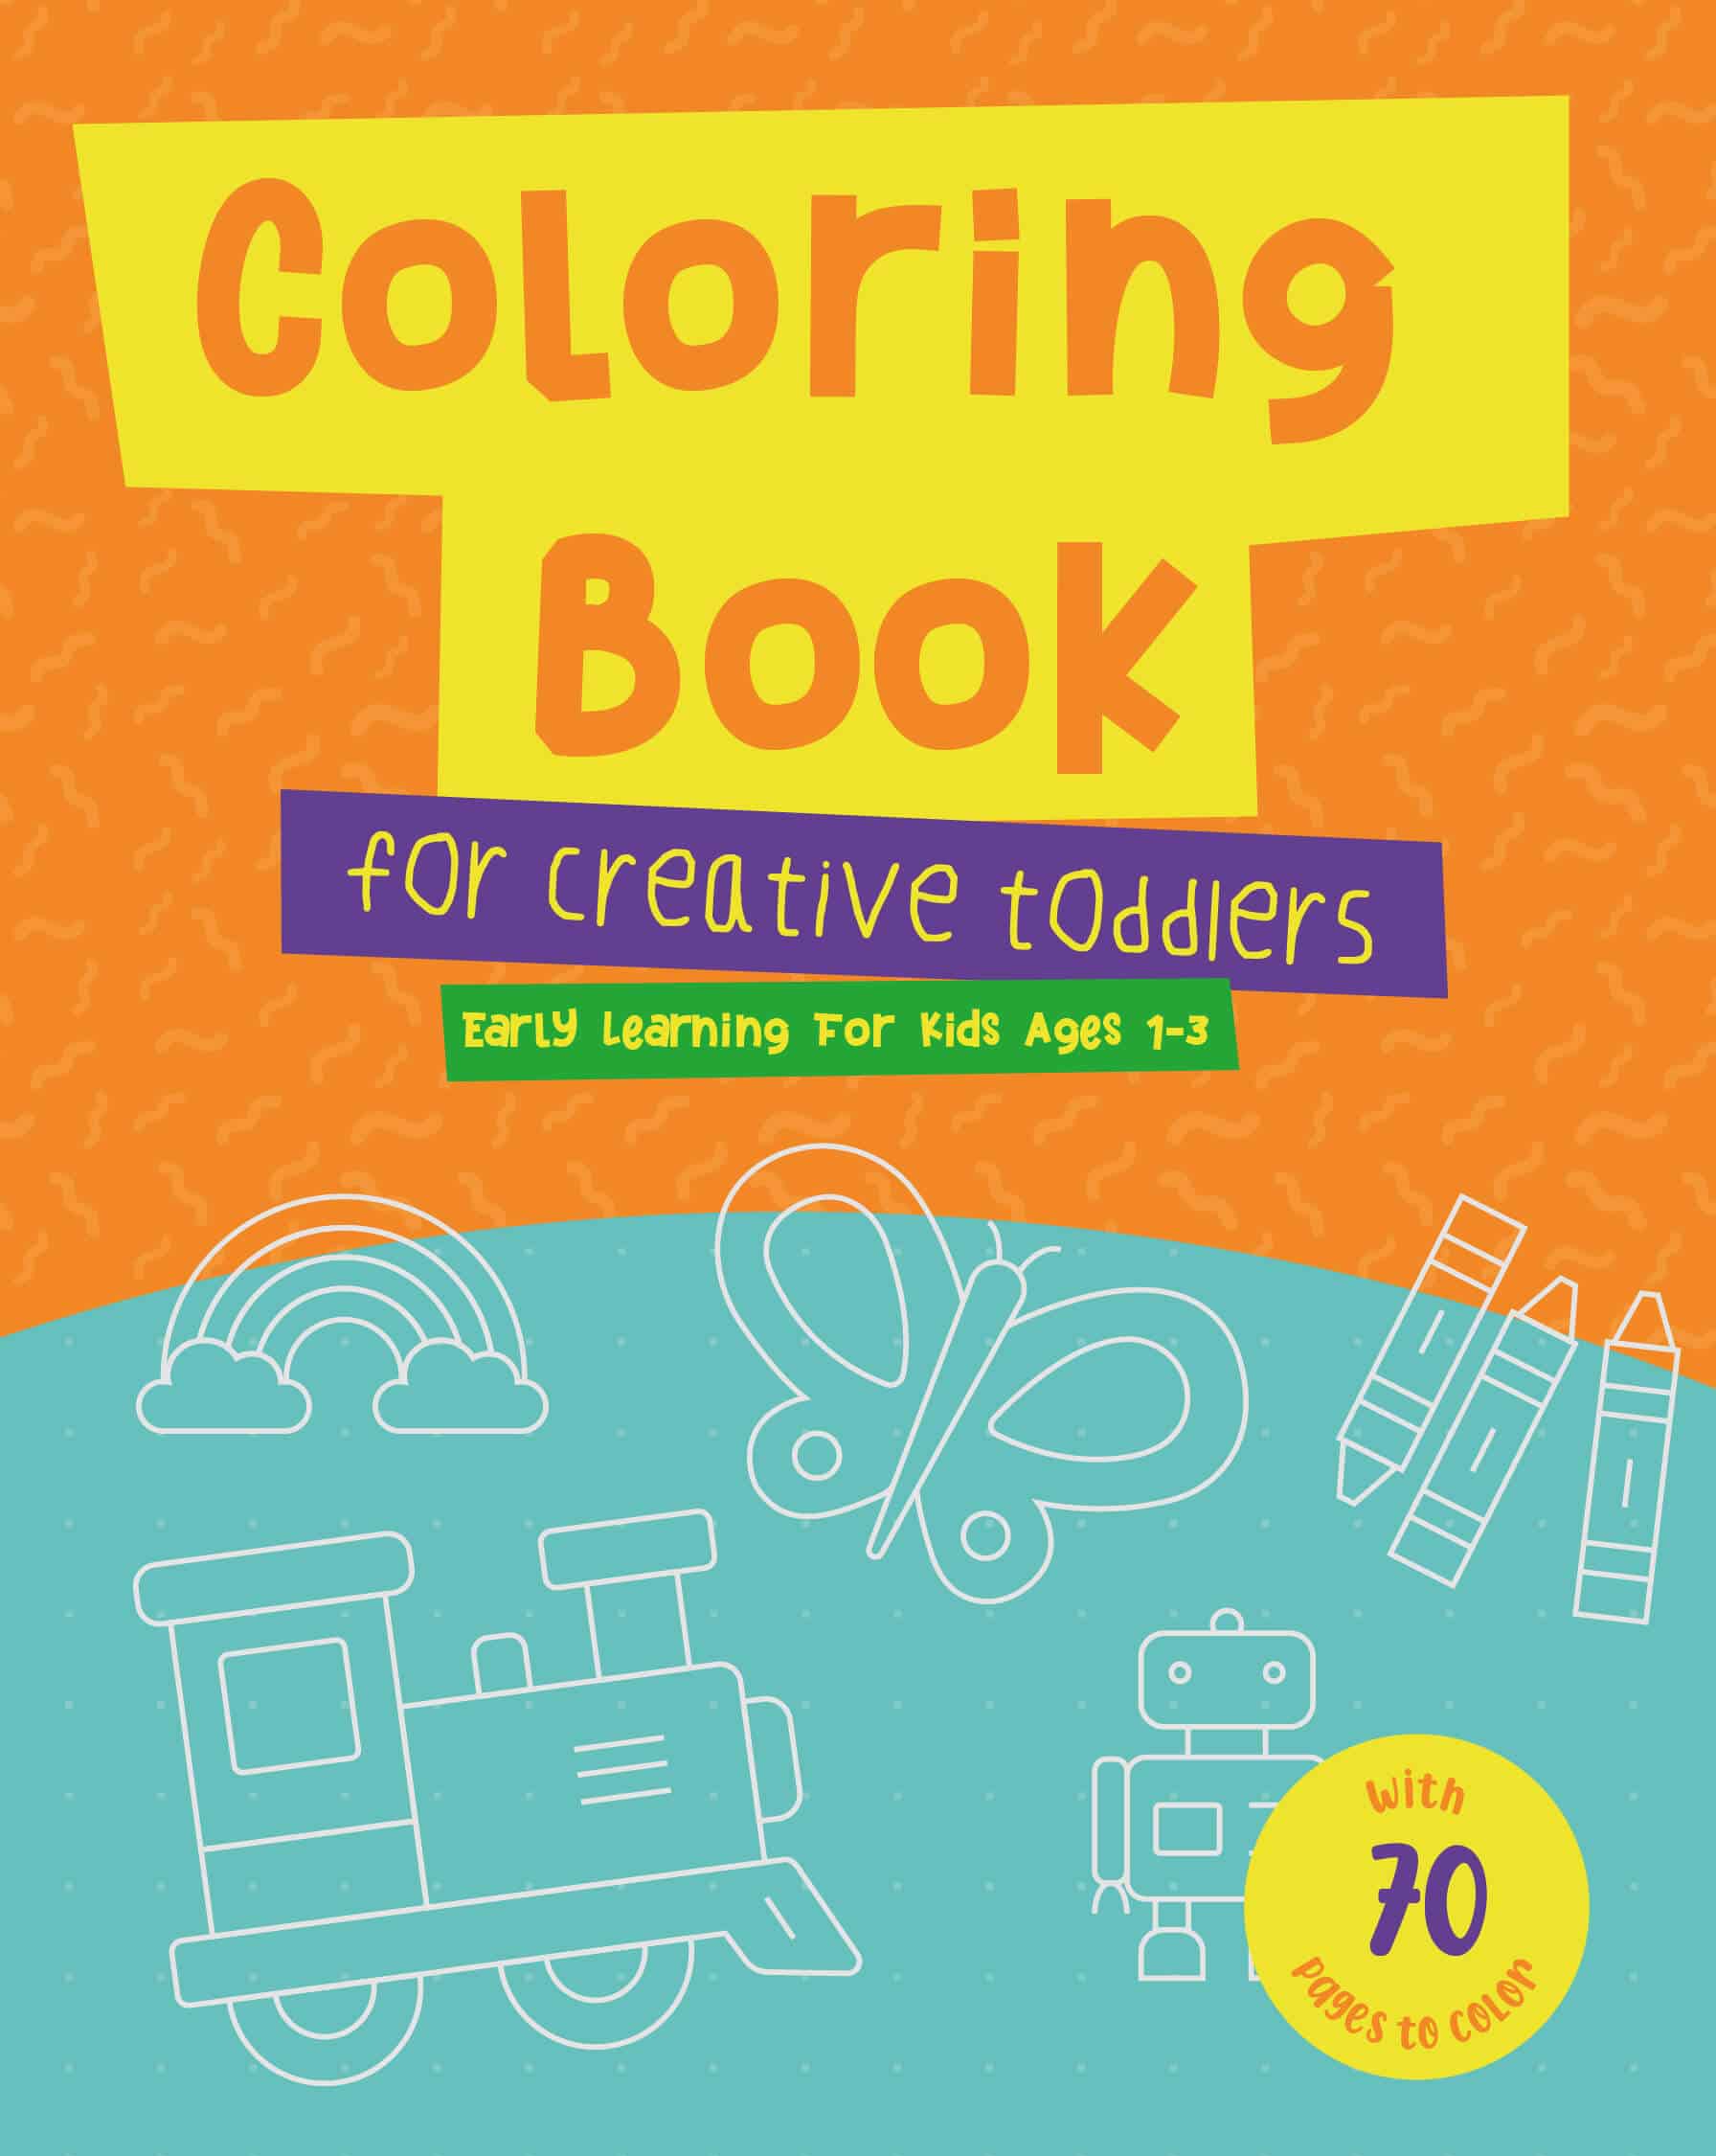 Coloring Books Online - Coloring Book for Creative Toddlers